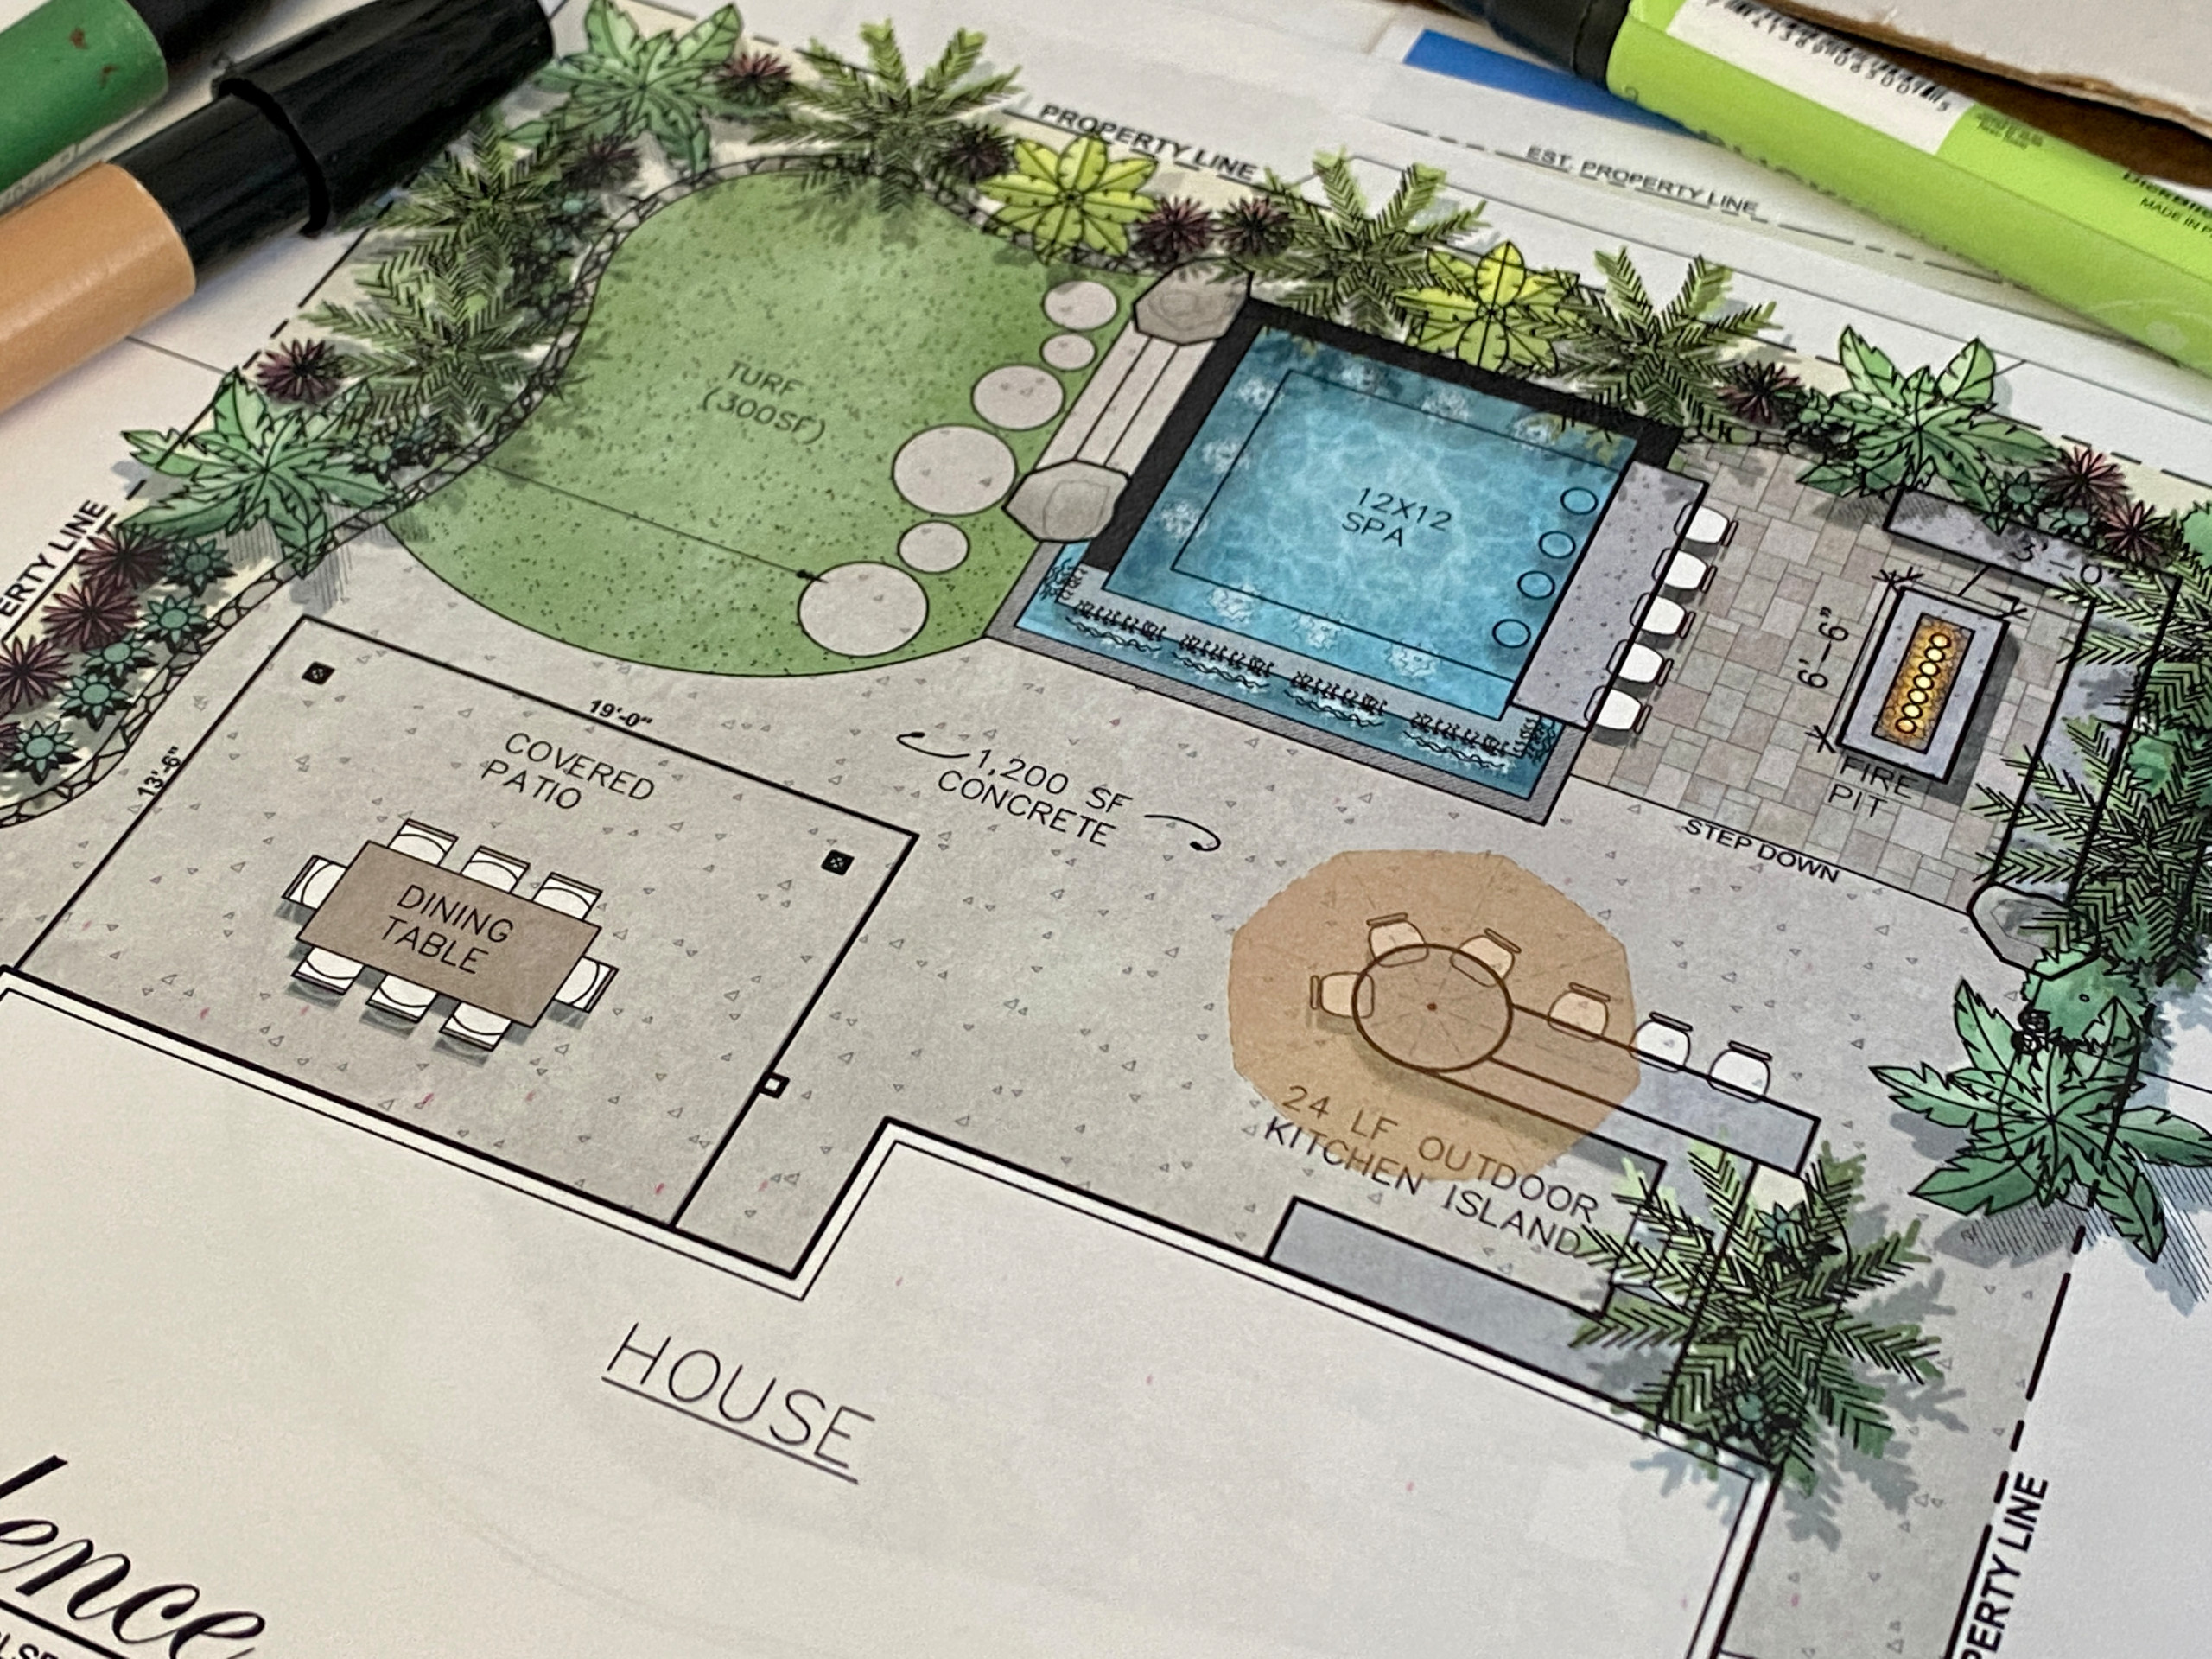 New Pool and Spa Design in Carlsbad